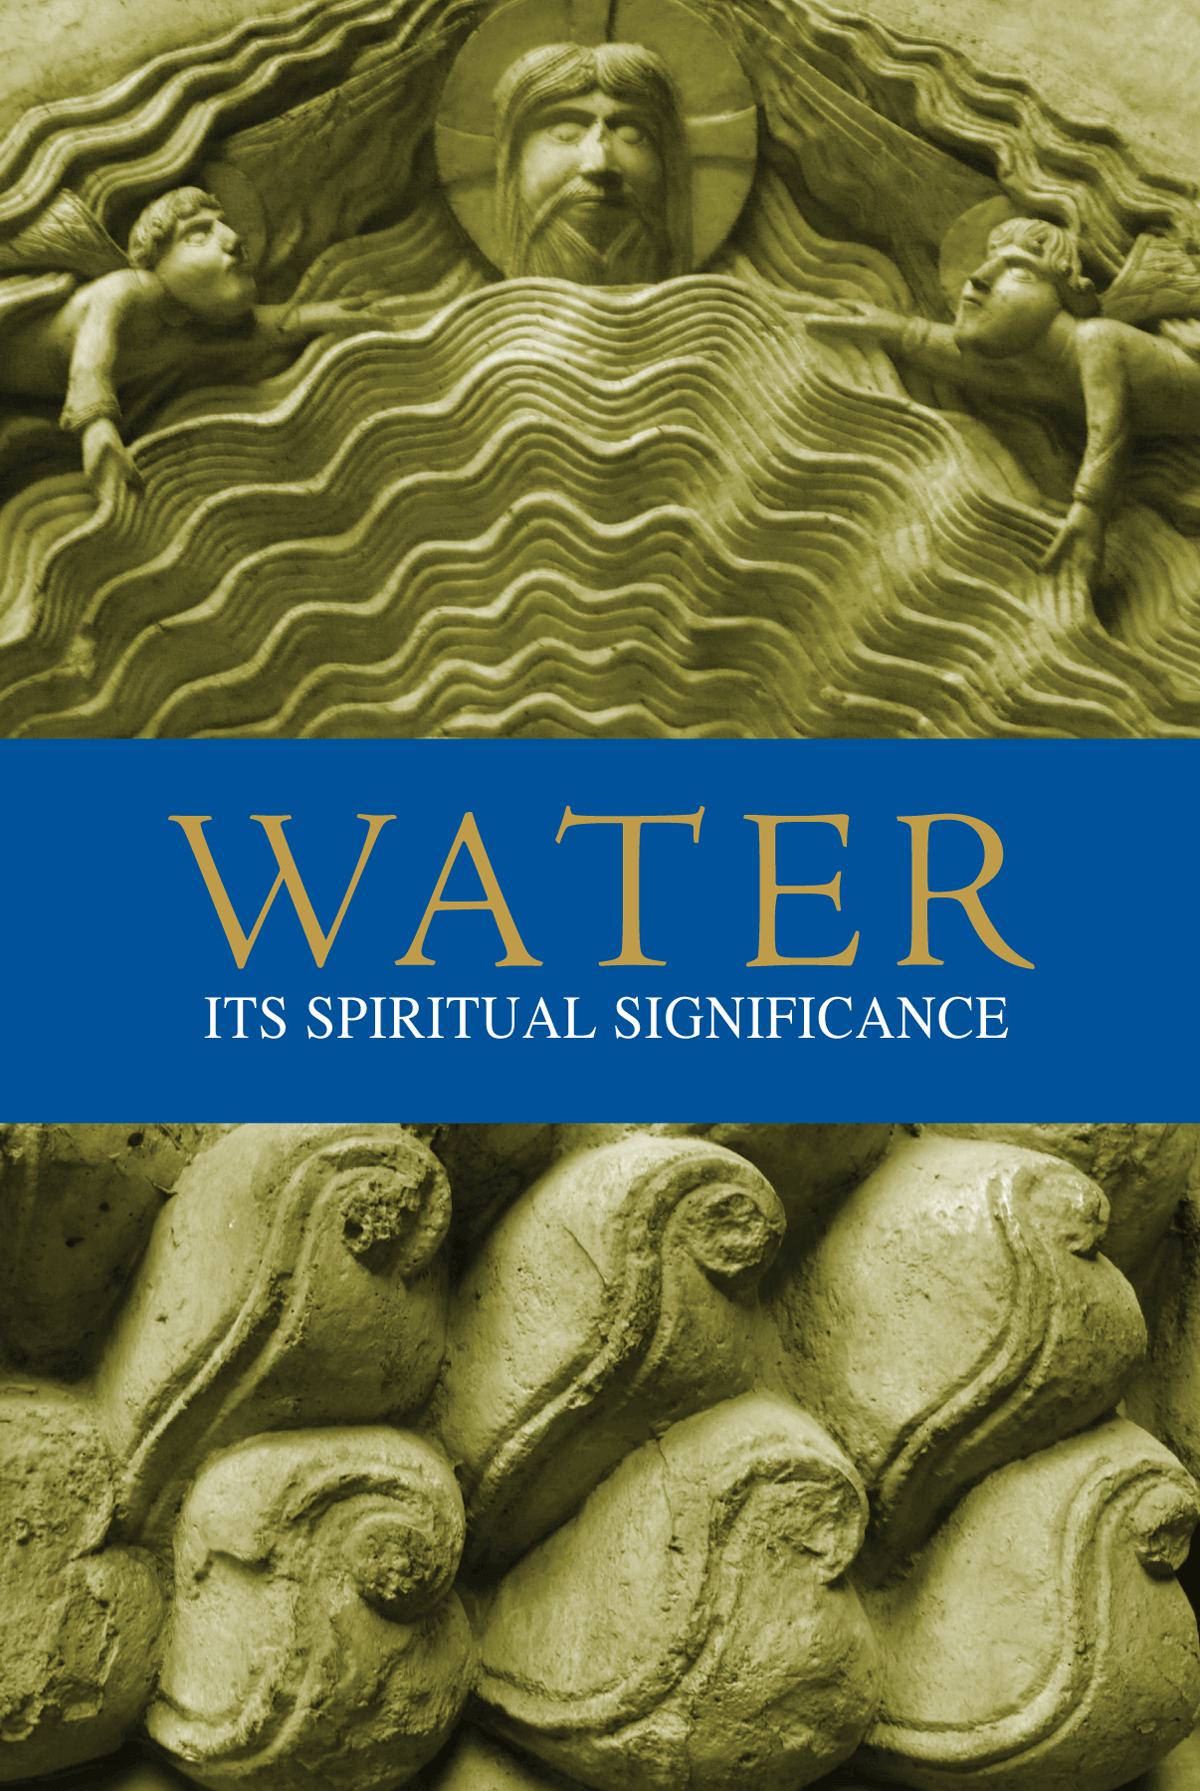 What does water mean spiritually?